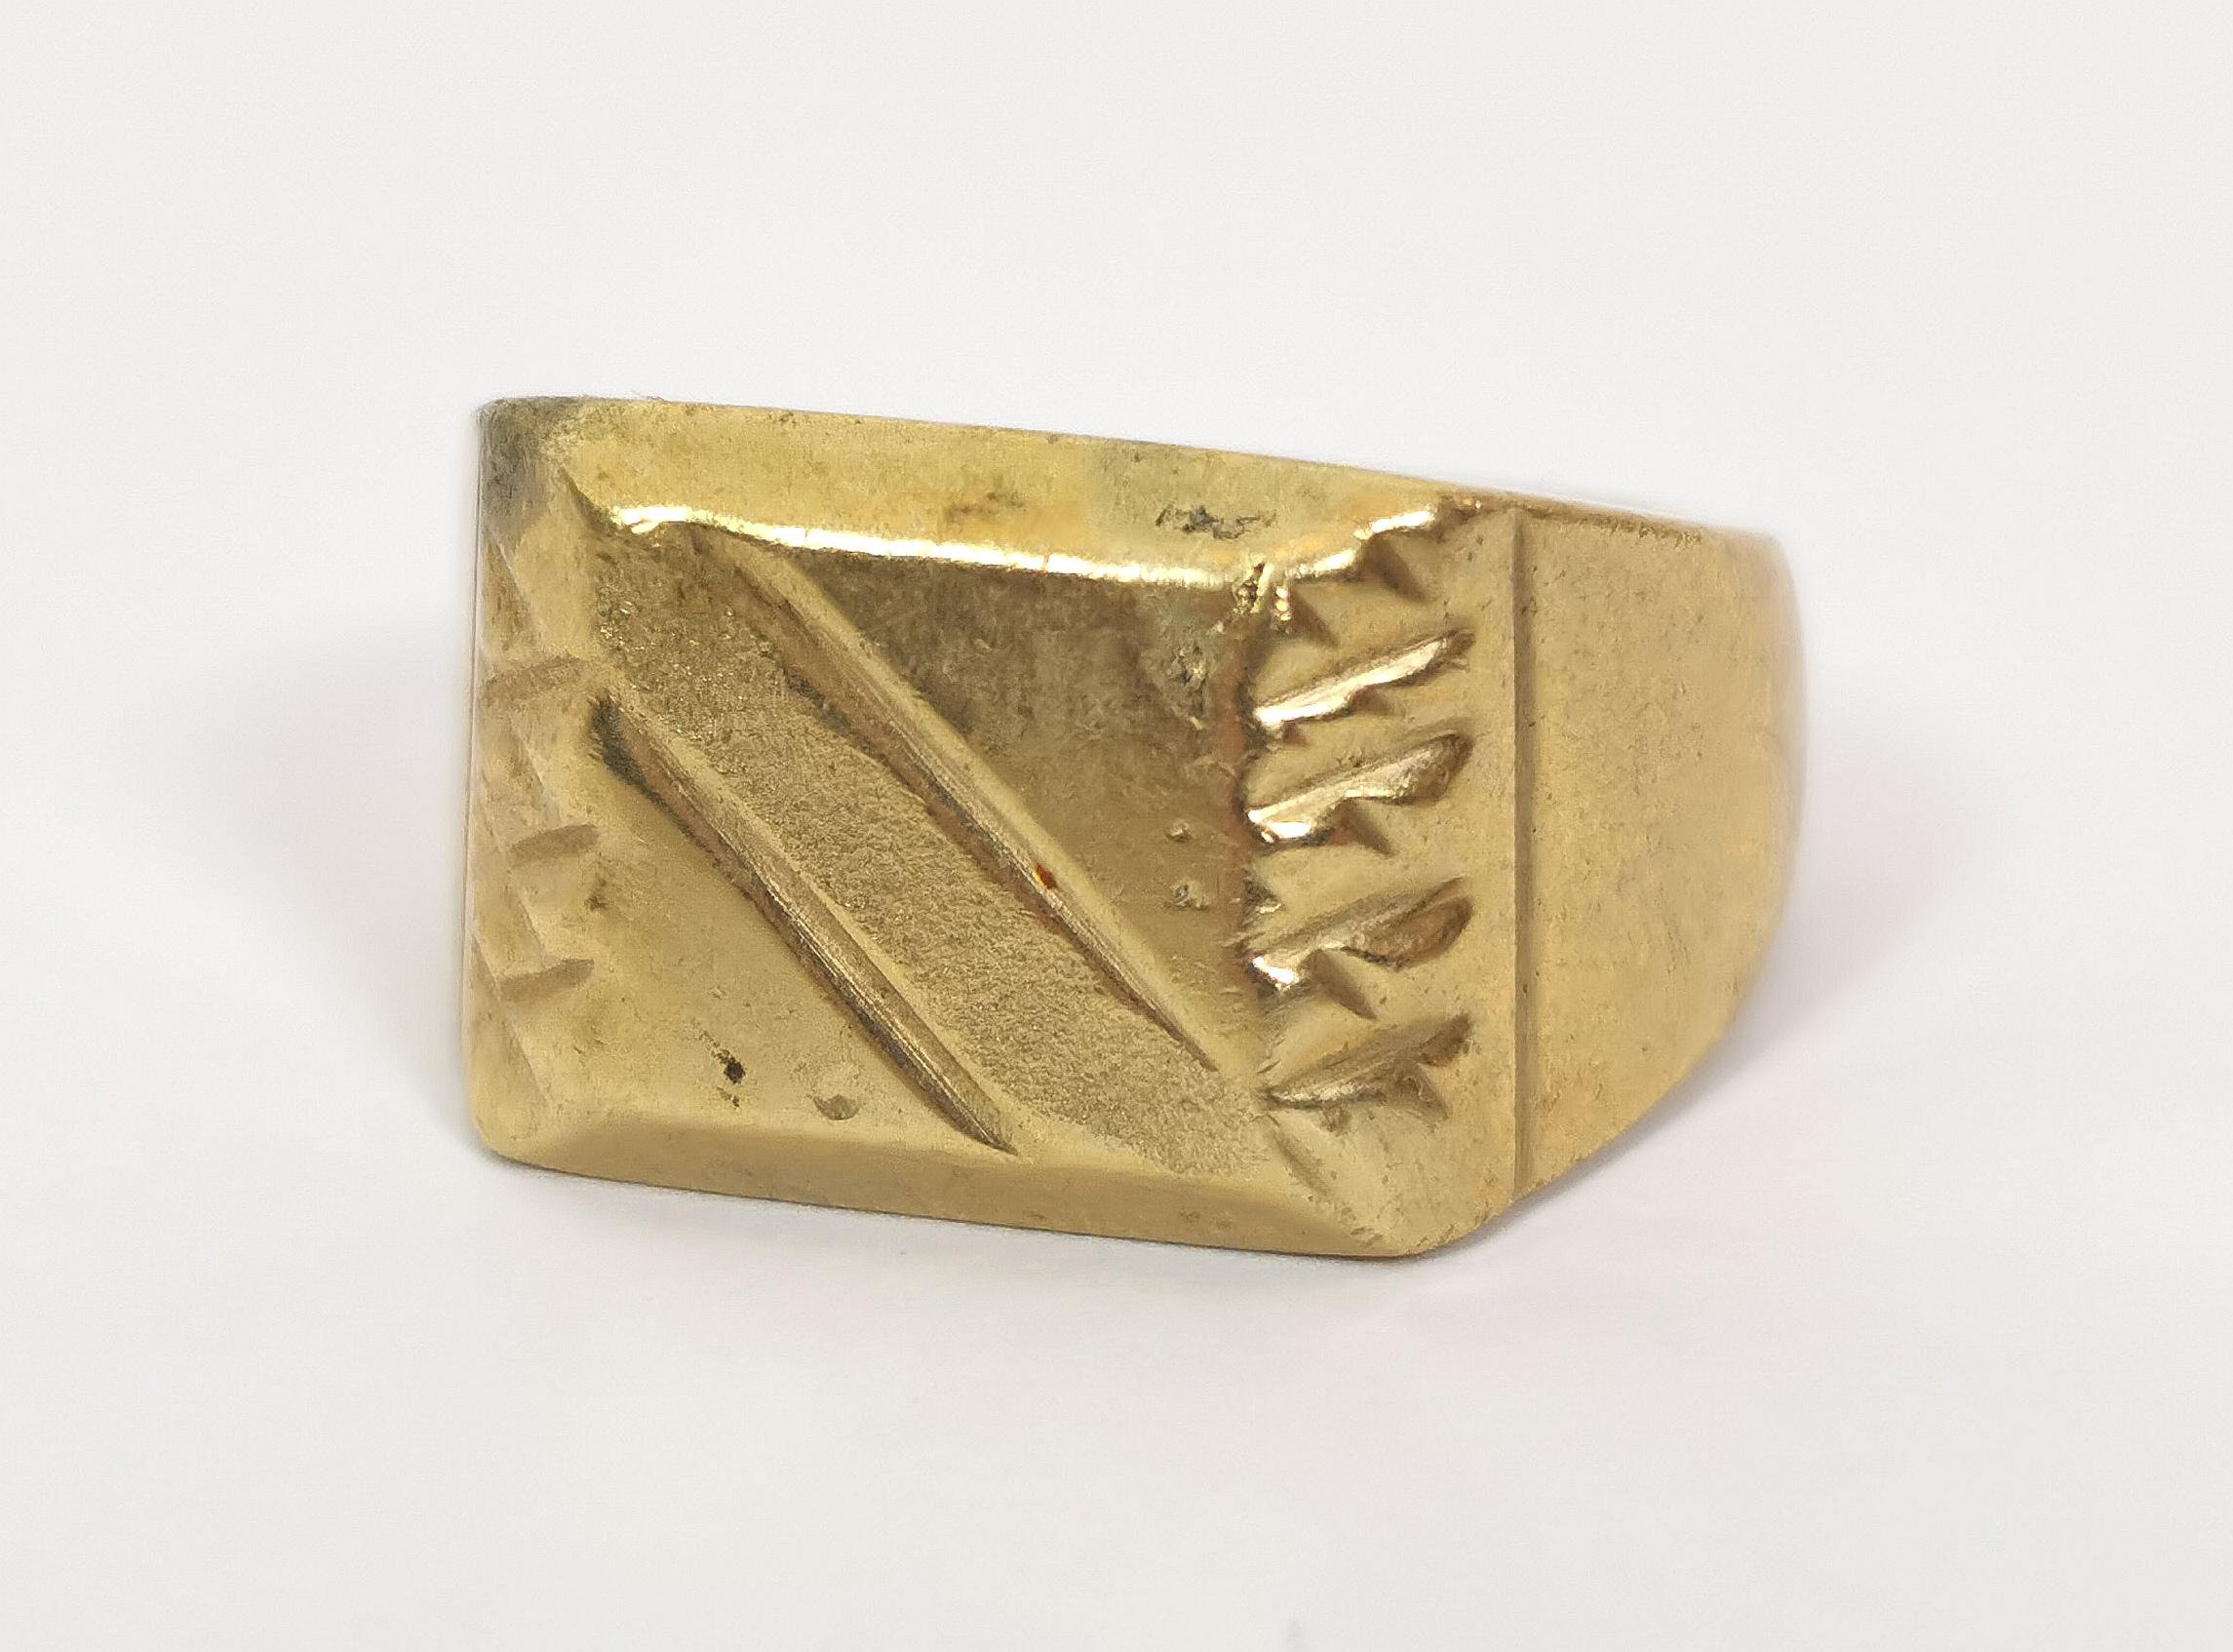 A fantastic vintage c1970s gold plated signet ring.

All the chunky and heavy features of a gold signet ring in a rich 18kt gold plating.

It has a diagonal engraving to the front and engraving to the shoulders.

It is very heavy so you can